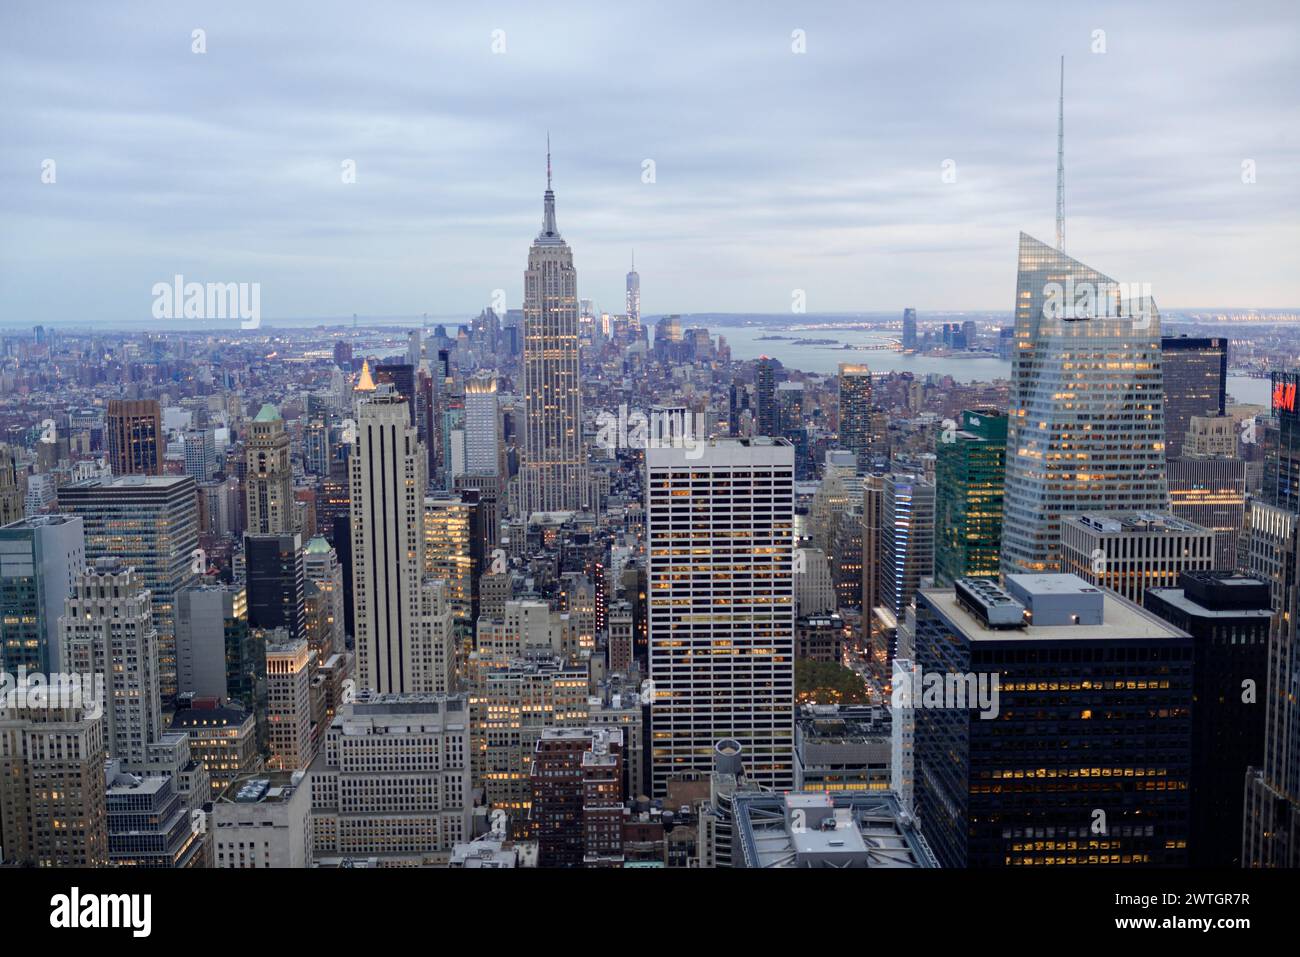 Viewing terrace of the Rockefeller Center, panorama of the city with the Empire State Building at dusk, Manhattan, New York City, New York, USA Stock Photo